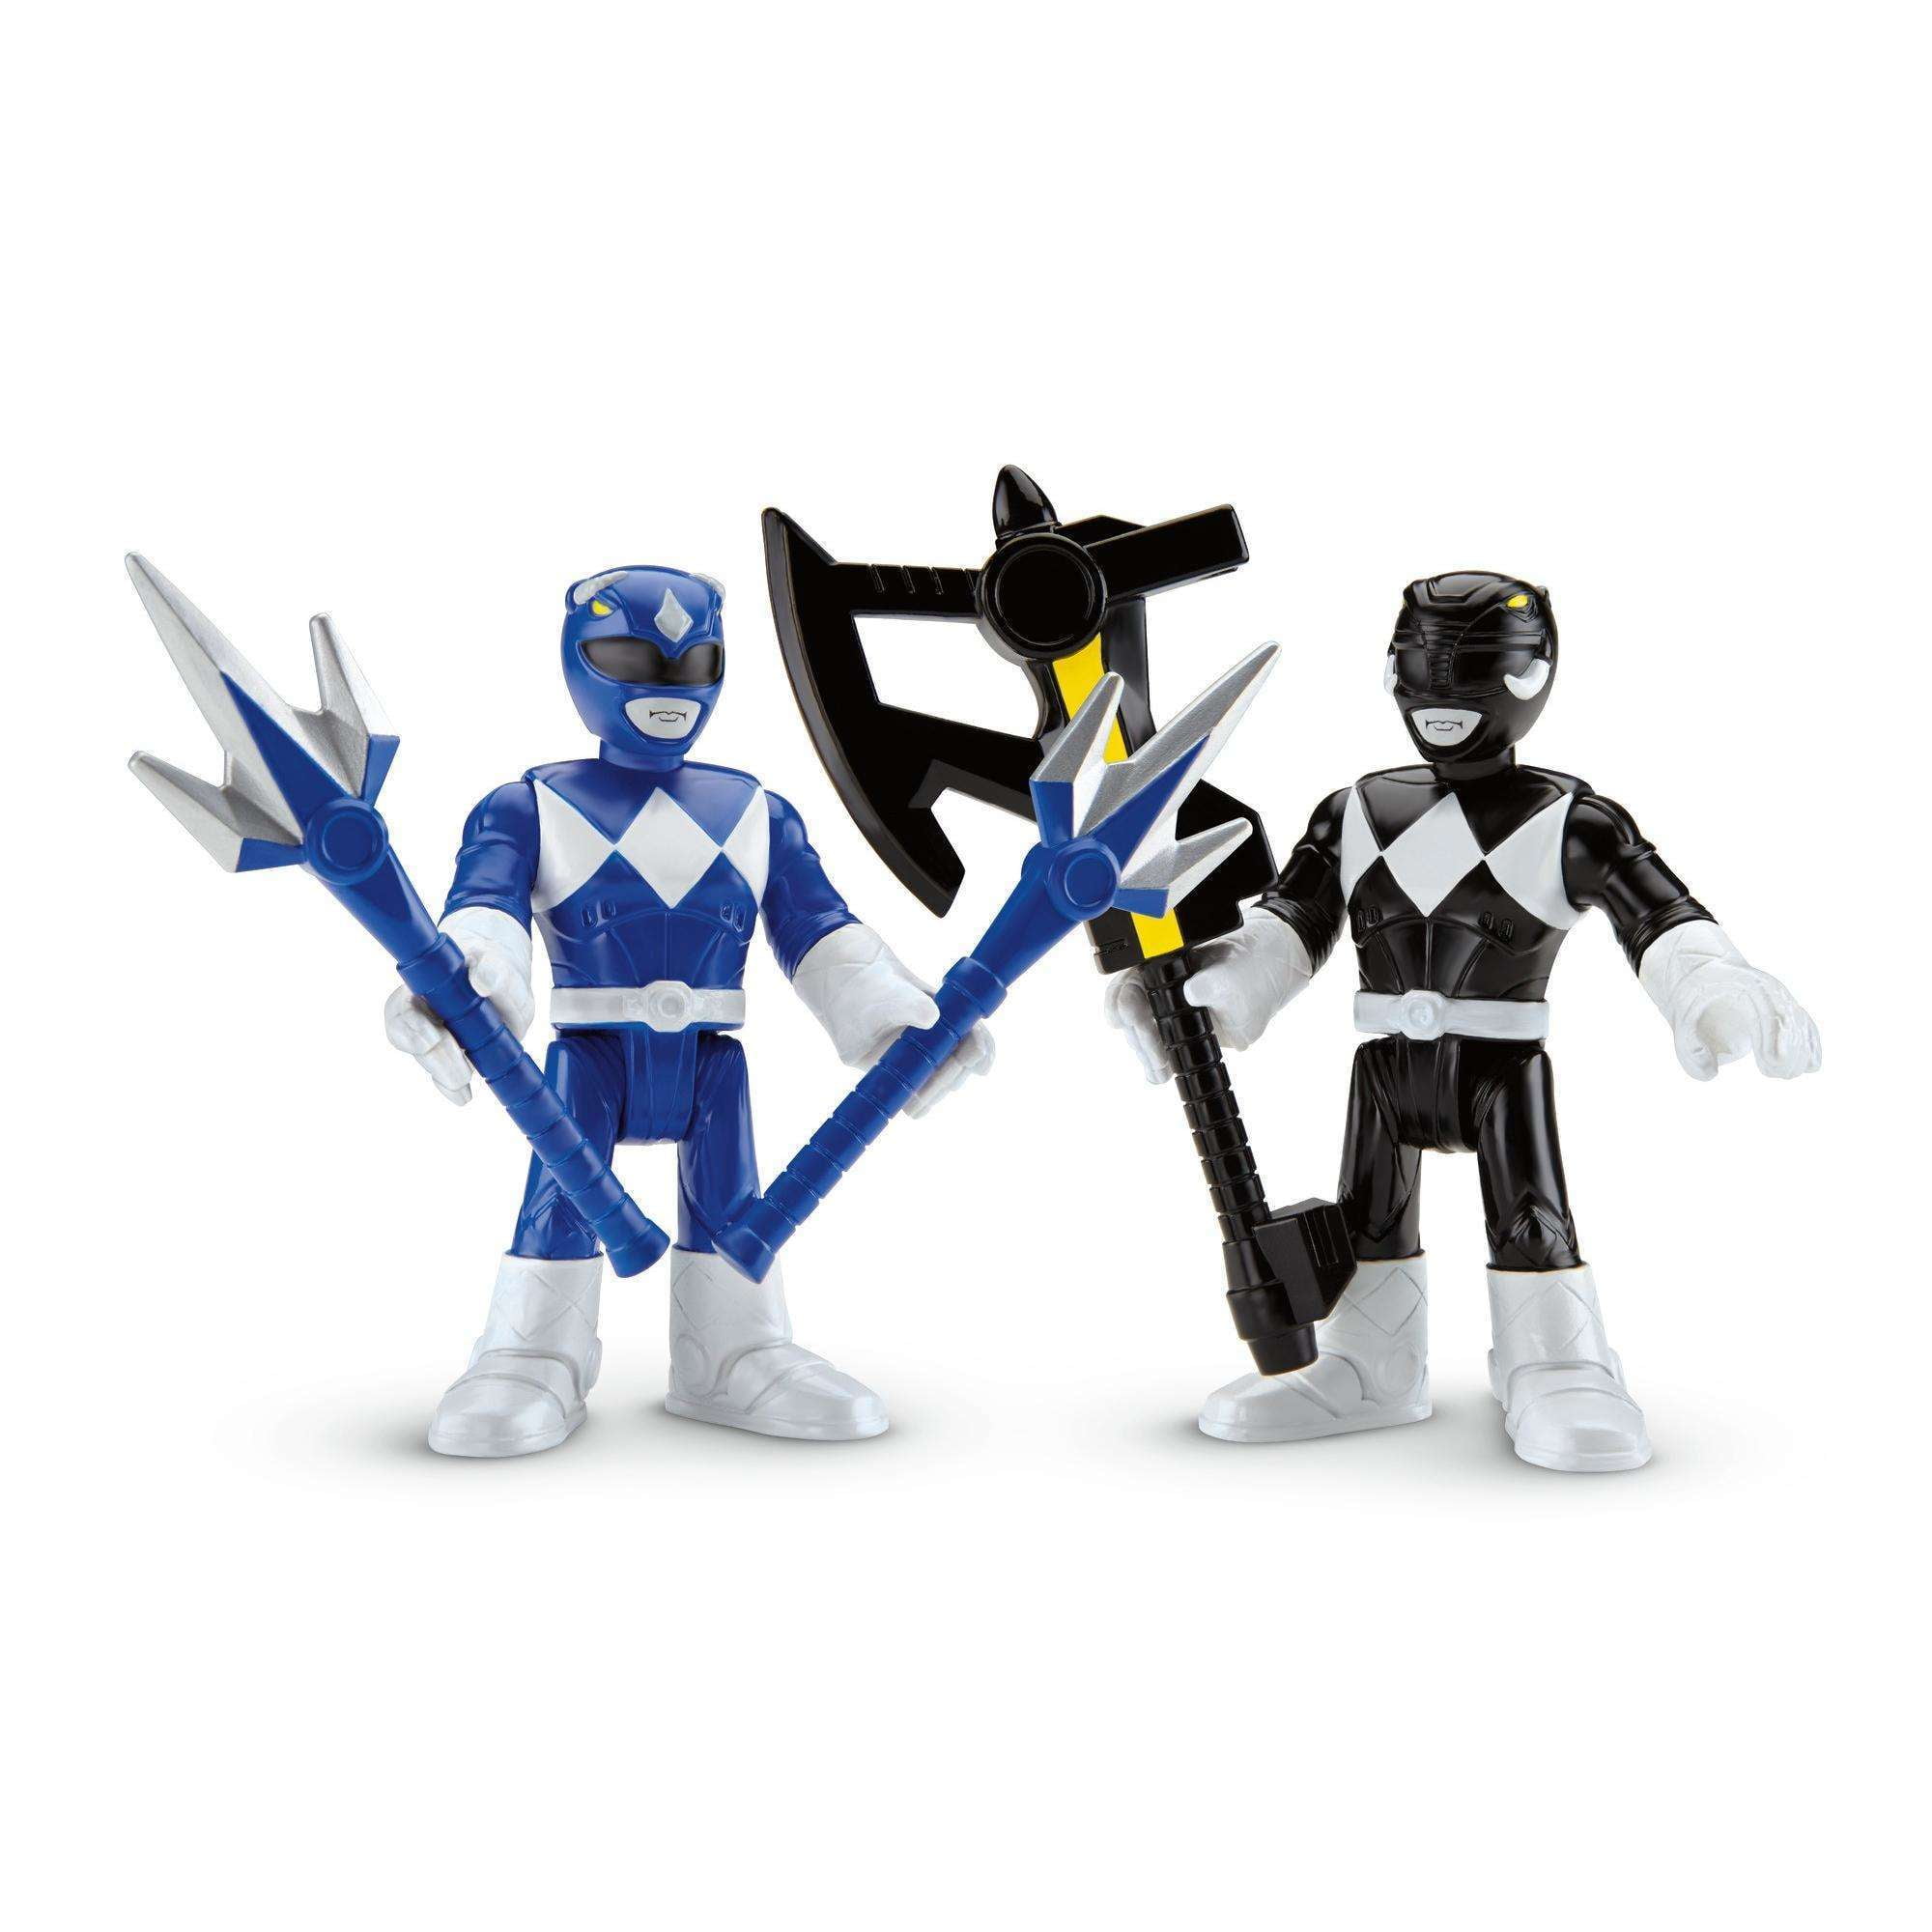 2.8" Fisher Price Imaginext Power Rangers blue Ranger with Sword Weapon New 